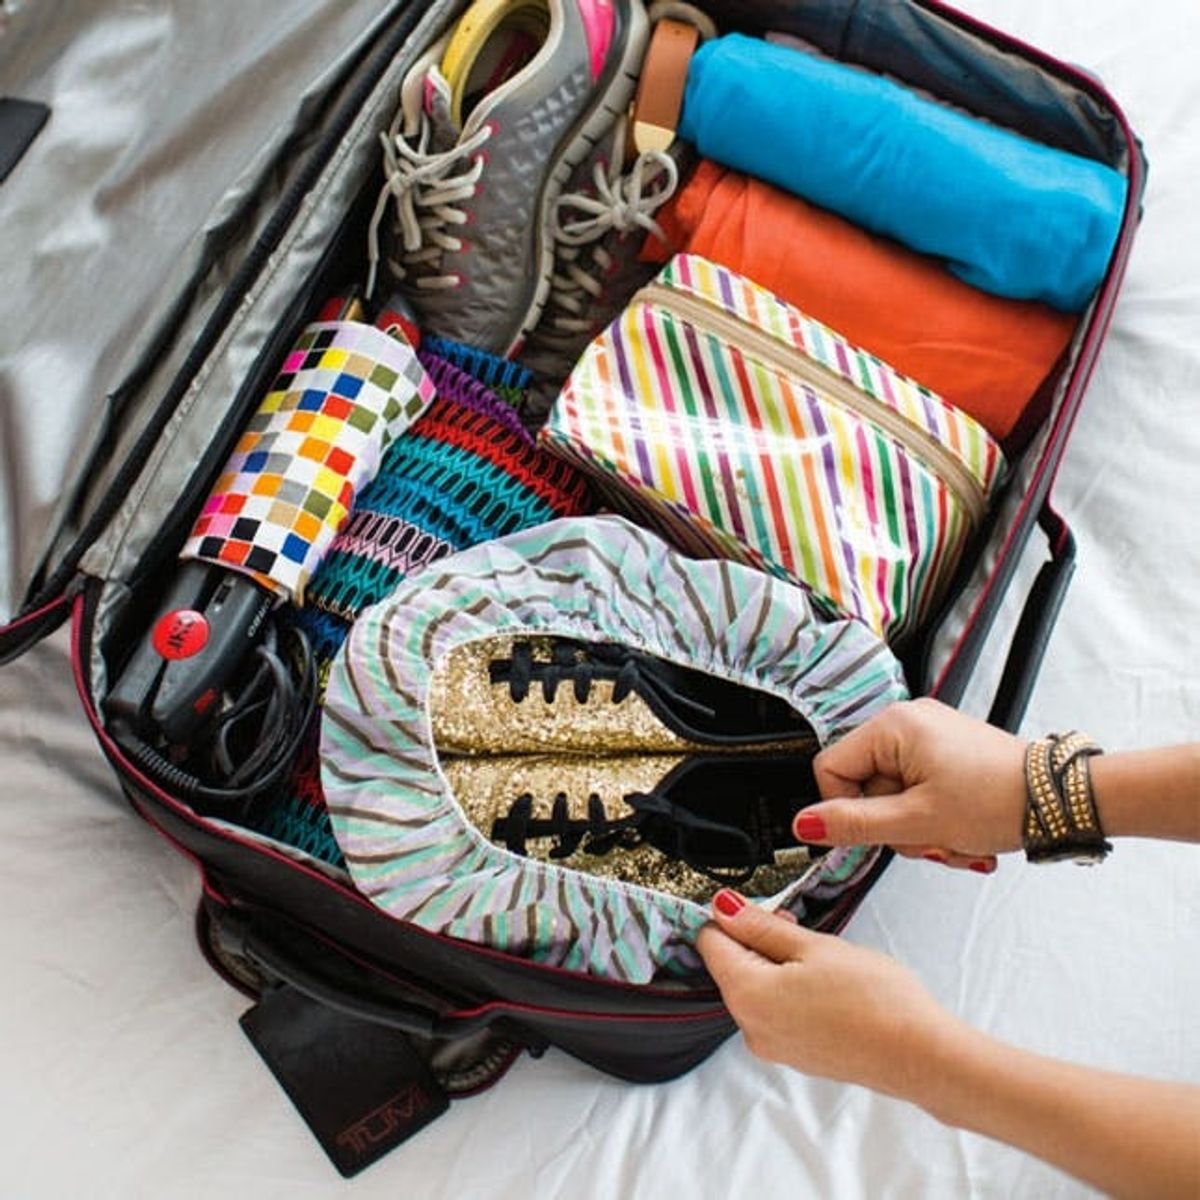 How to Pack the Perfect Carry-On Suitcase